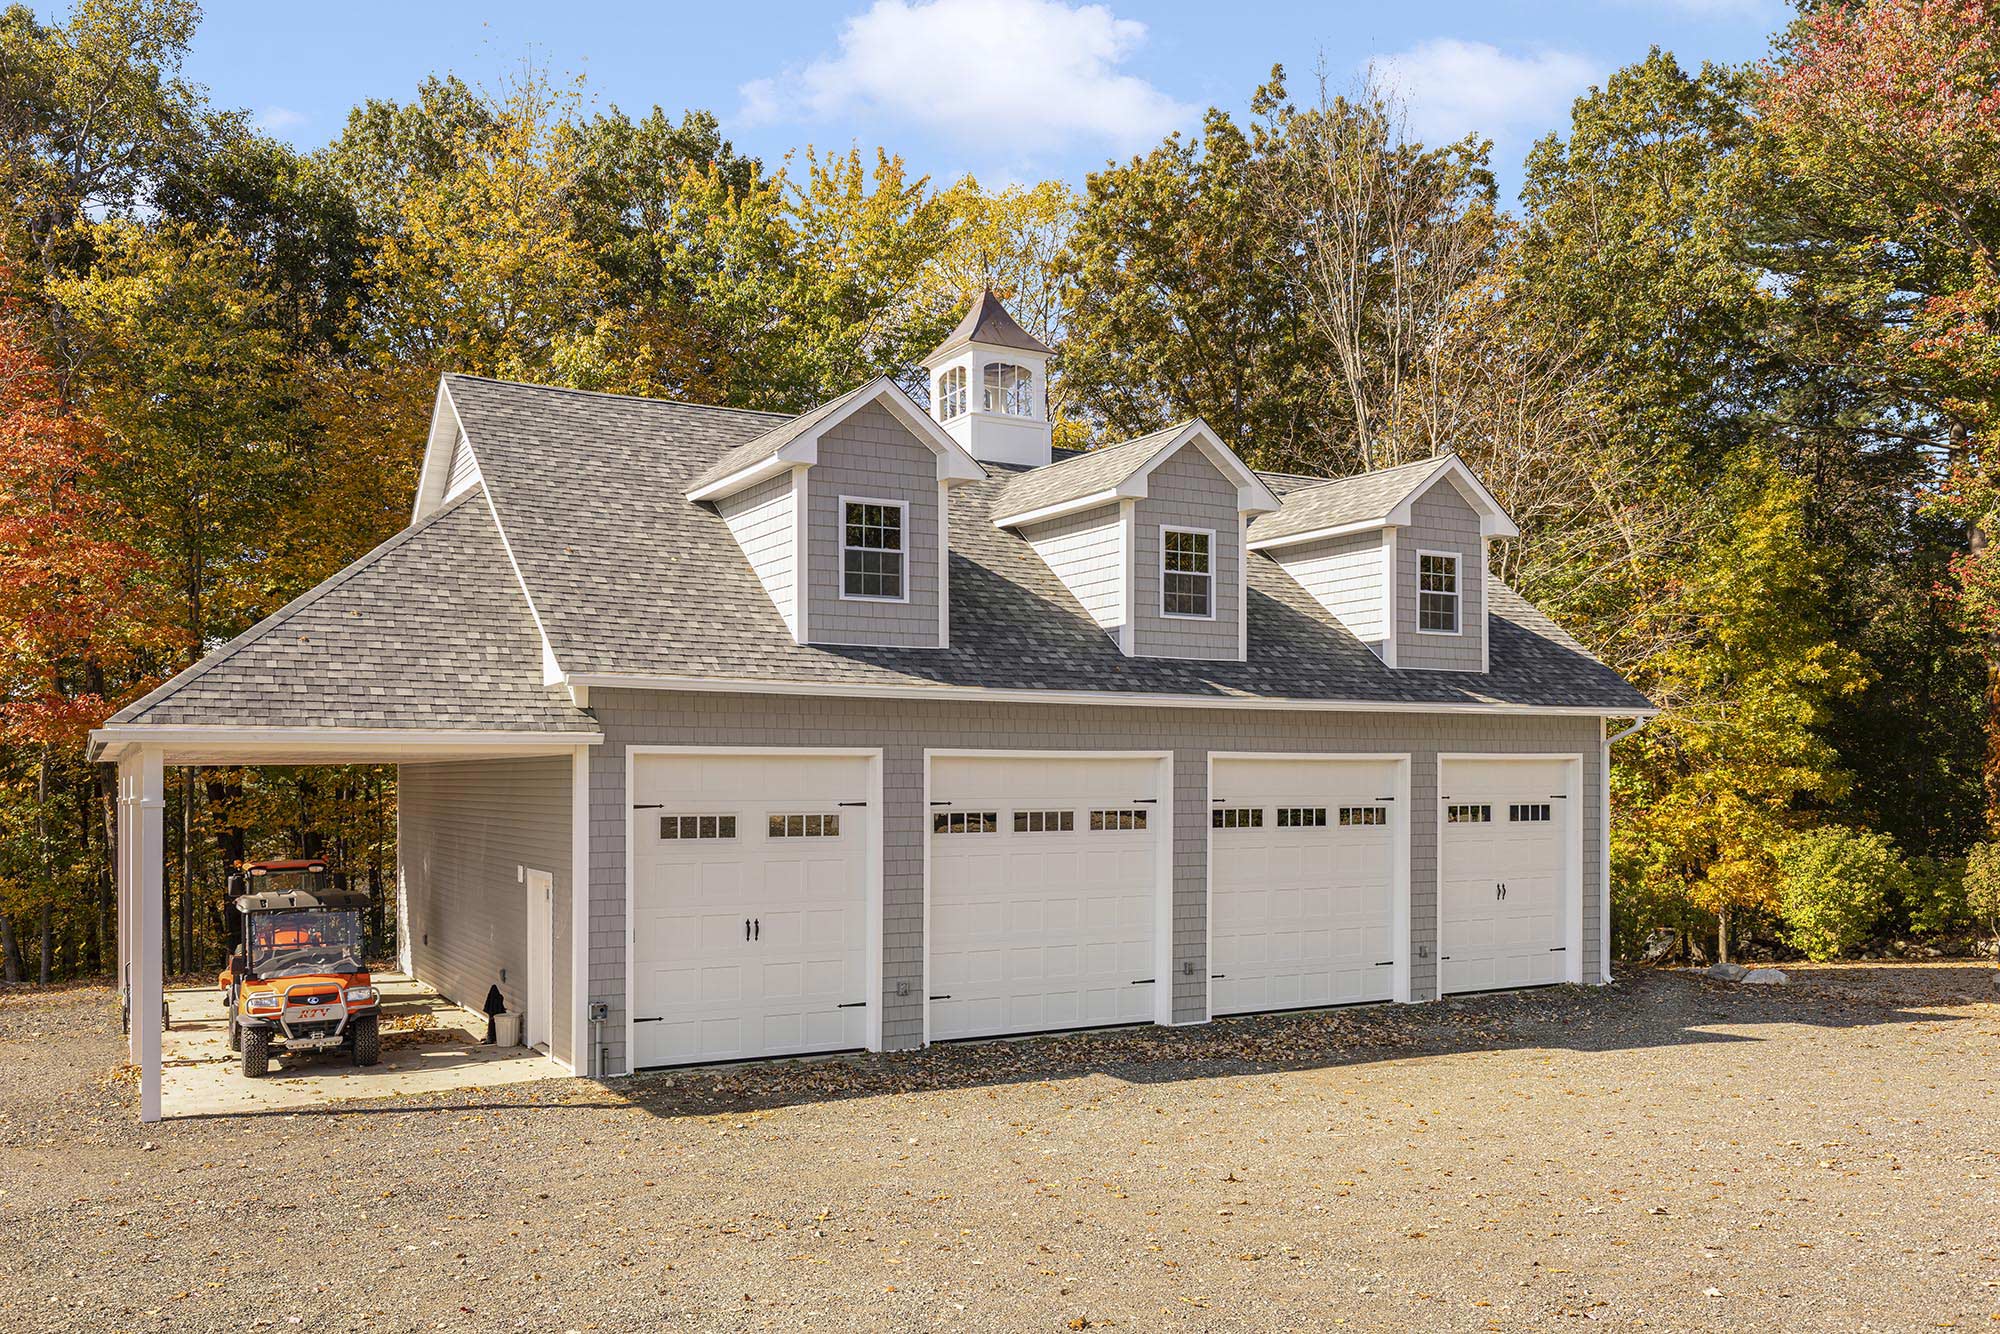 Cheap Garages vs. Turnkey Garages – What’s the Difference?